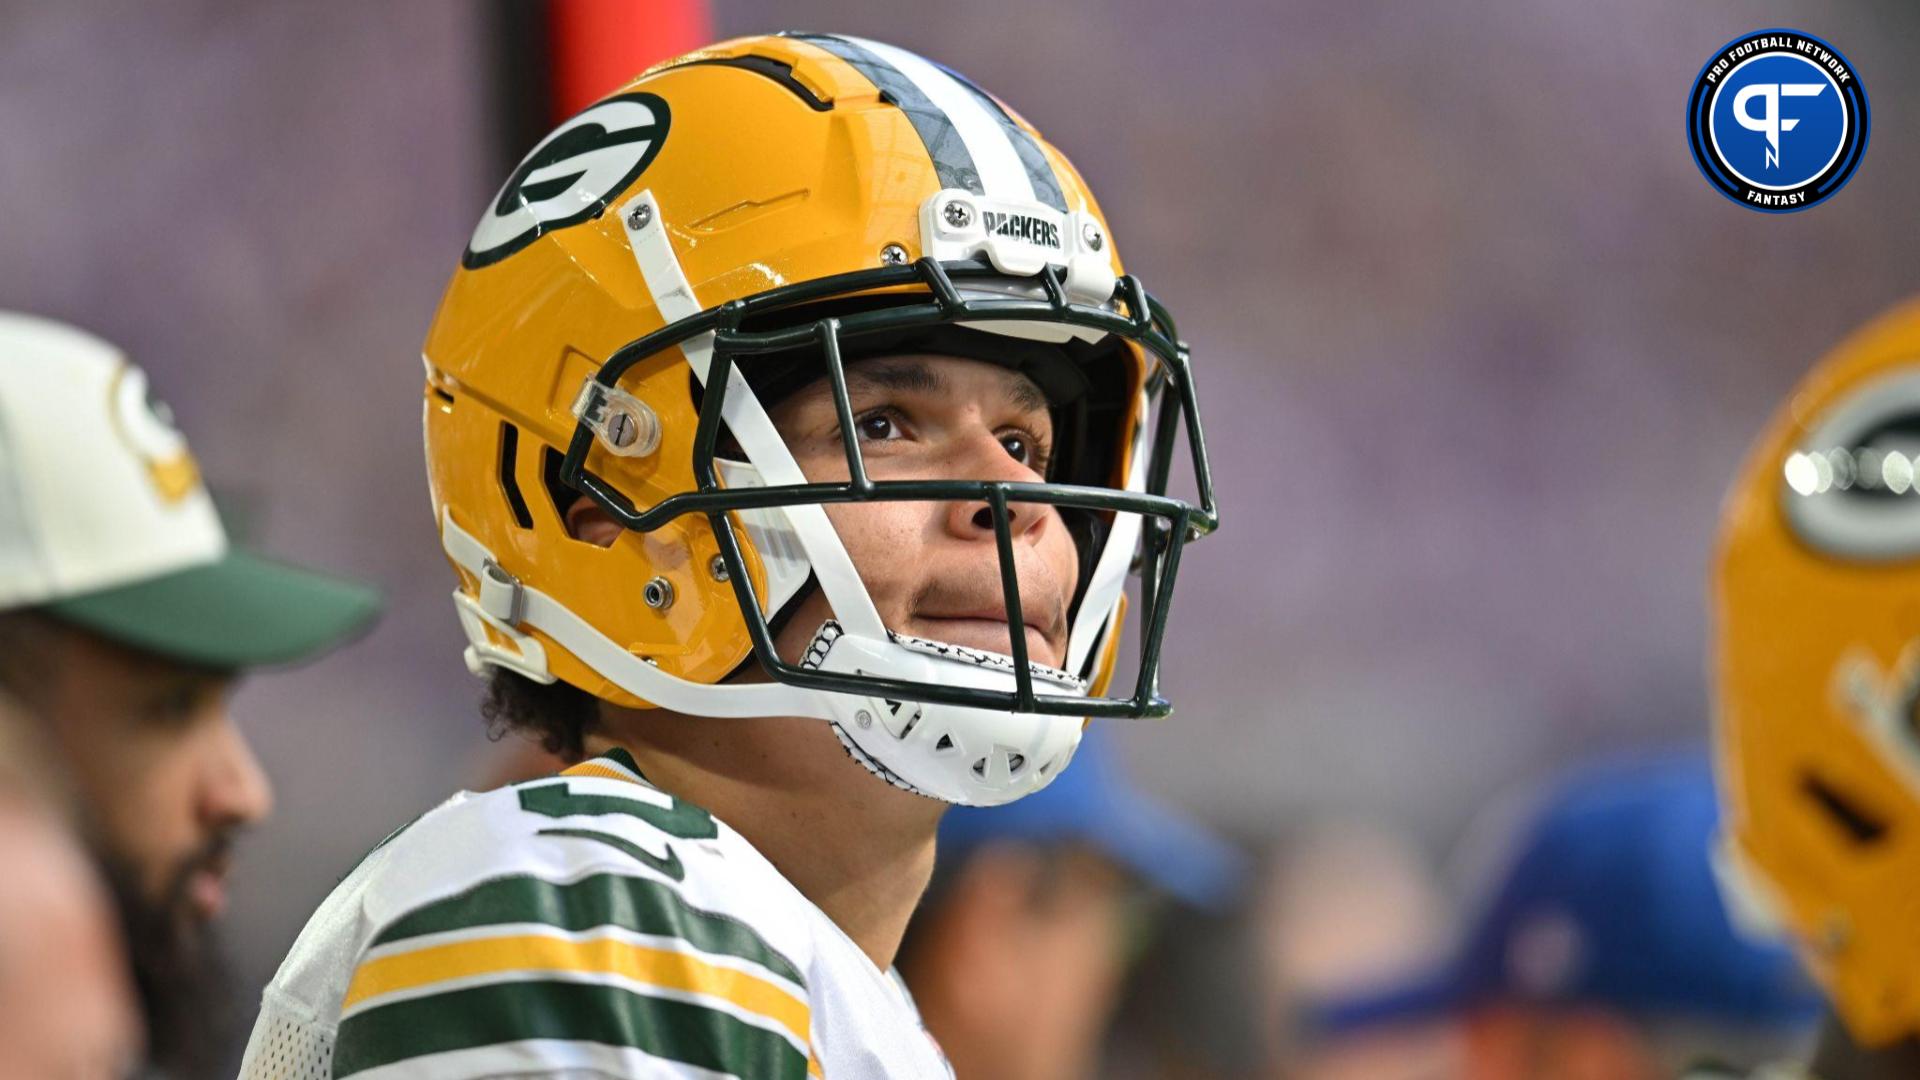 Christian Watson injury update: Packers WR could play vs. Vikings